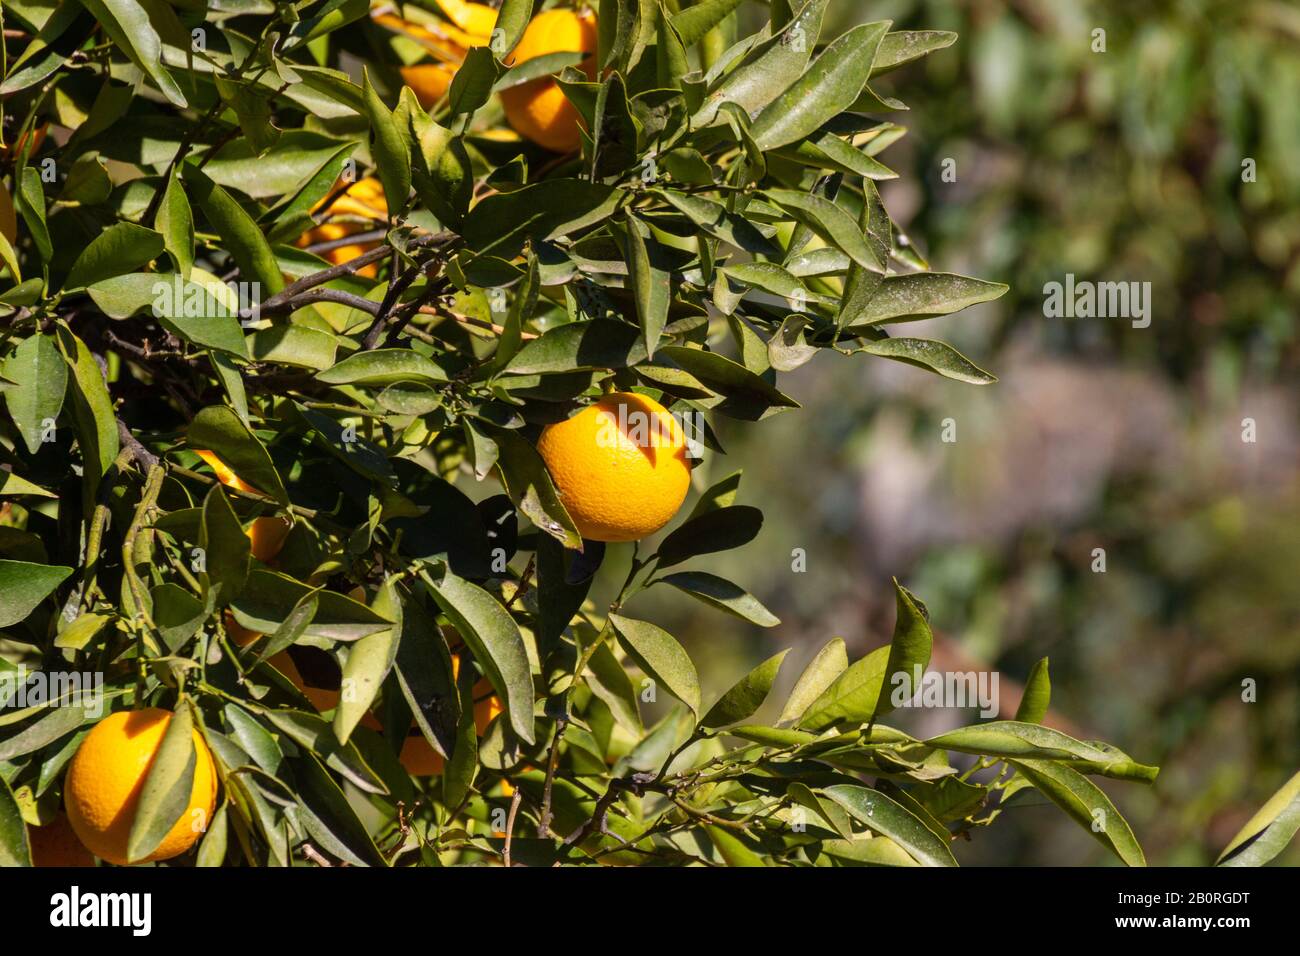 Oranges growing in a tree Stock Photo